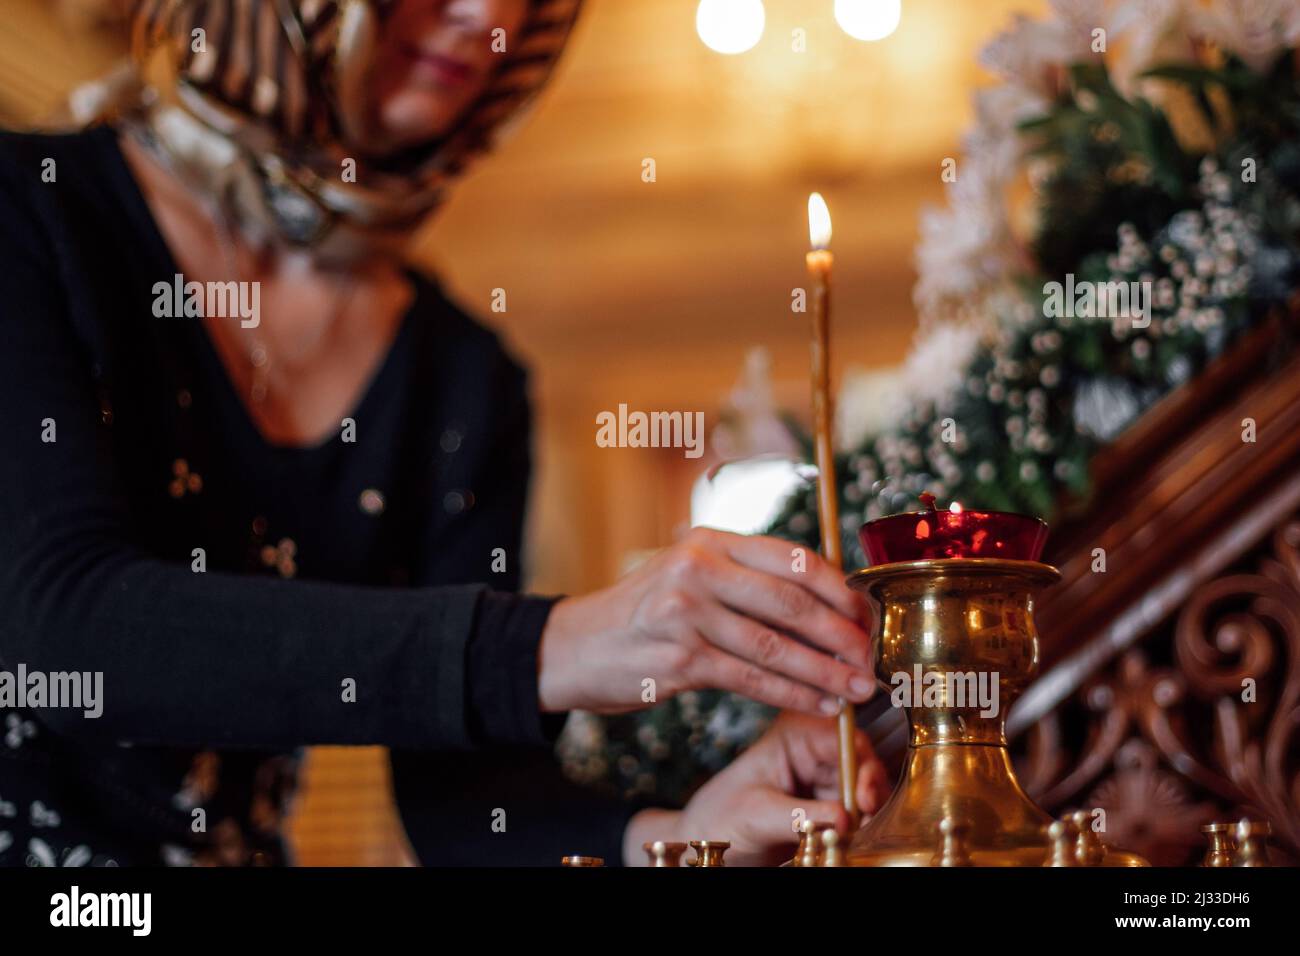 Cropped photo of woman wearing headscarf, putting burning candle on golden stand with candlesticks in orthodox church. Stock Photo